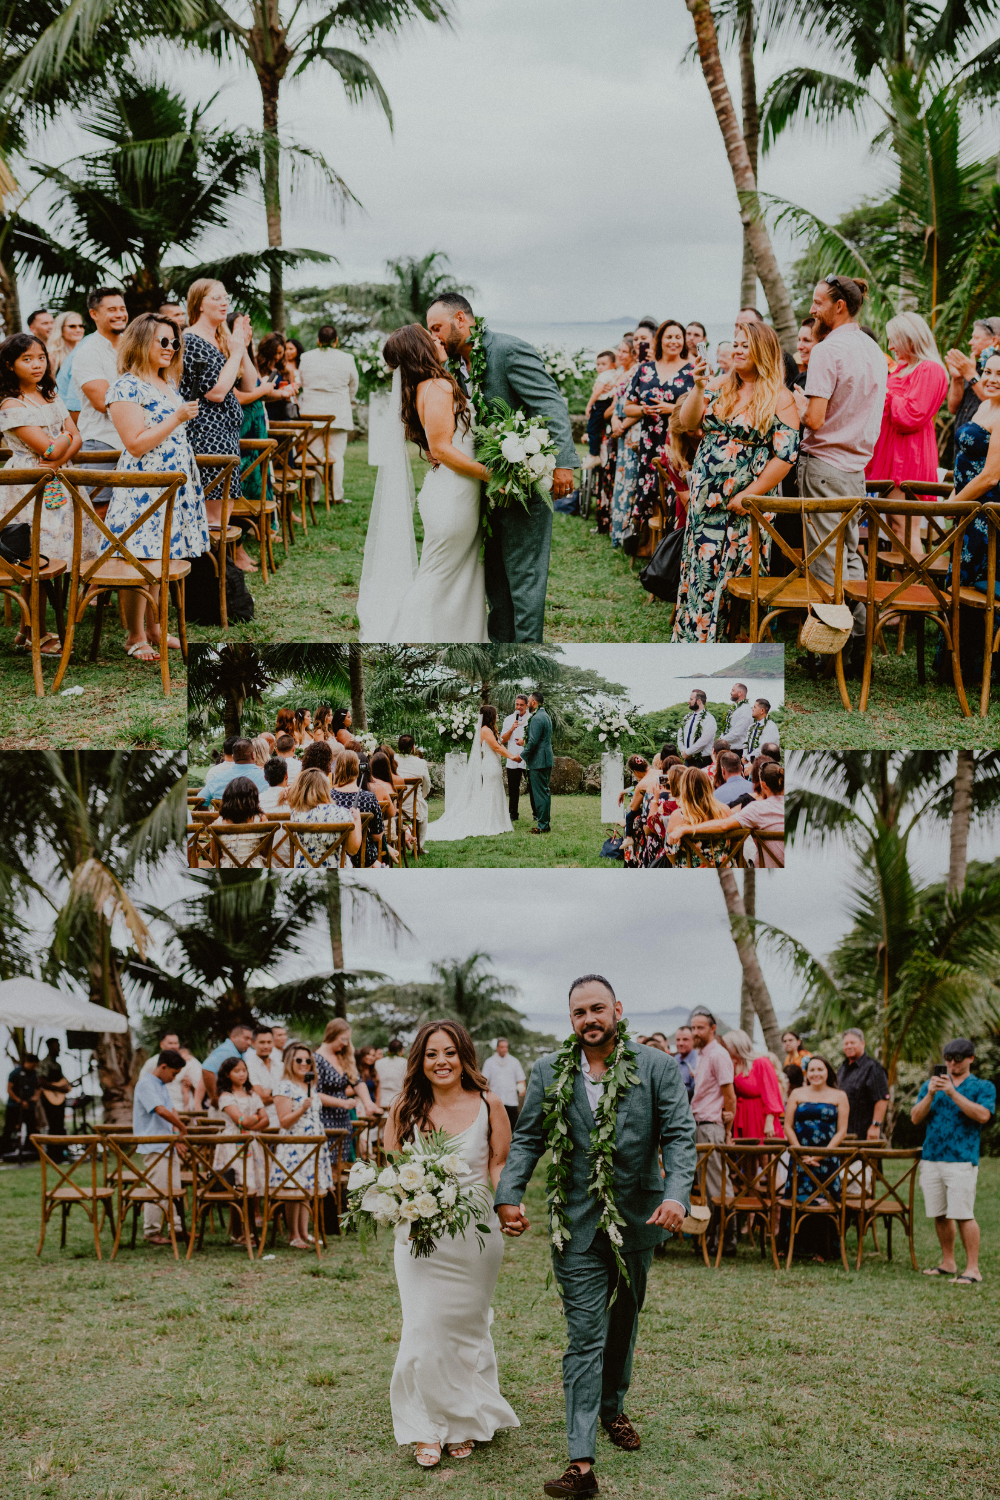 Bride and groom walk back down the aisle after their Kualoa Ranch Wedding in Oahu while guests look at them and cheer them on | Oahu Wedding Photographer, Oahu Elopement Photographer, Destination Wedding Photographer, Destination Elopement Photographer, Newlywed moments ideas, Newlywed Photography inspiration, Hawaii Elopement ideas | chelseaabril.com